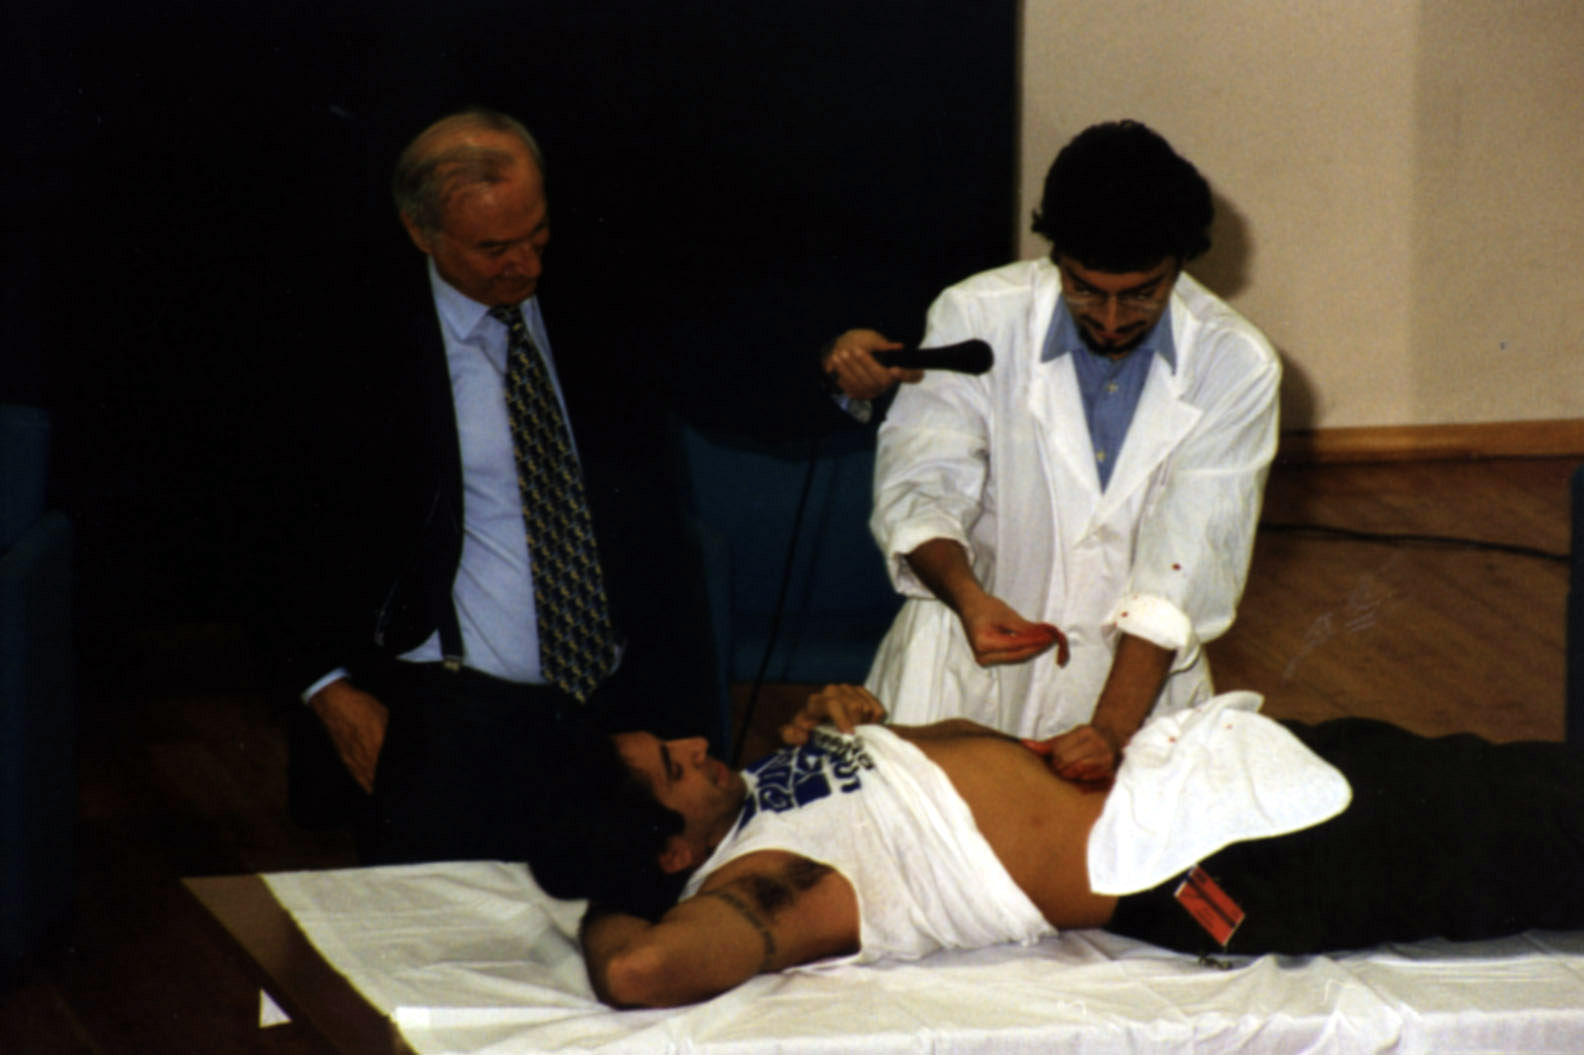 Massimo Polidoro performing psychic surgery with the help of Piero Angela and showing the trick